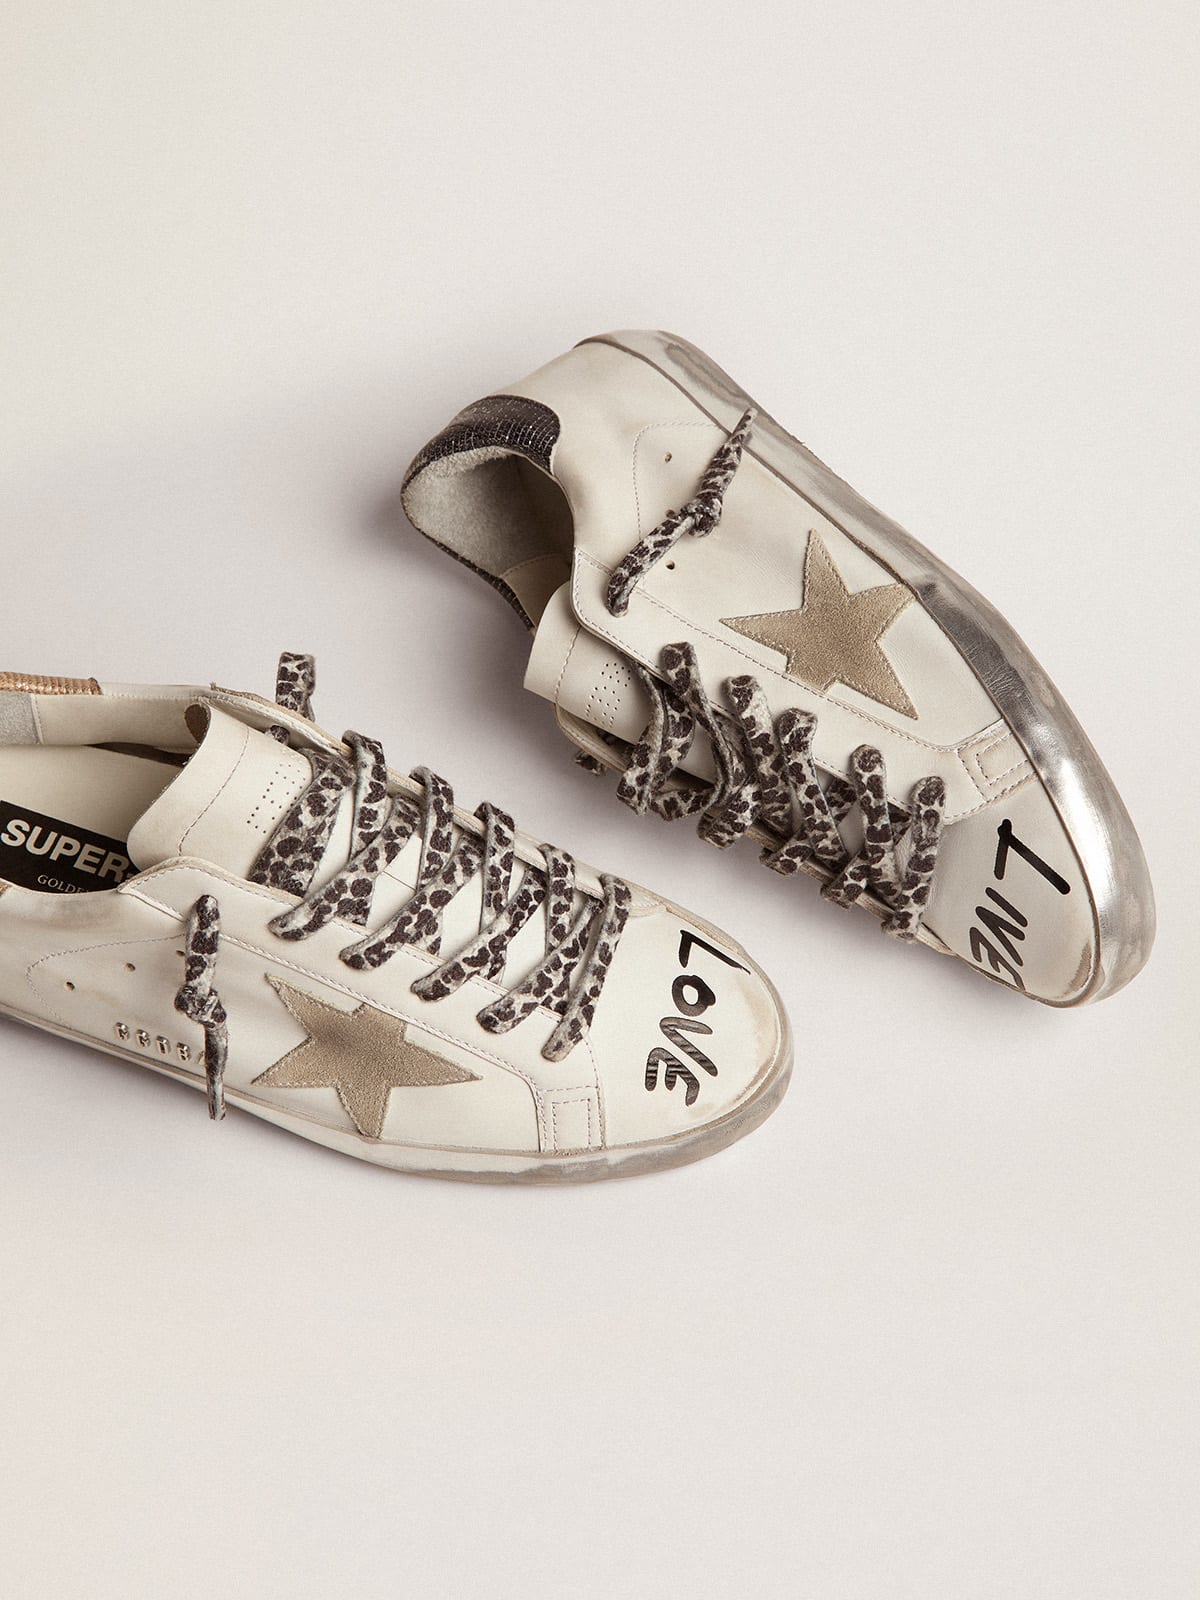 Super-Star sneakers in white leather with ice-gray suede star and